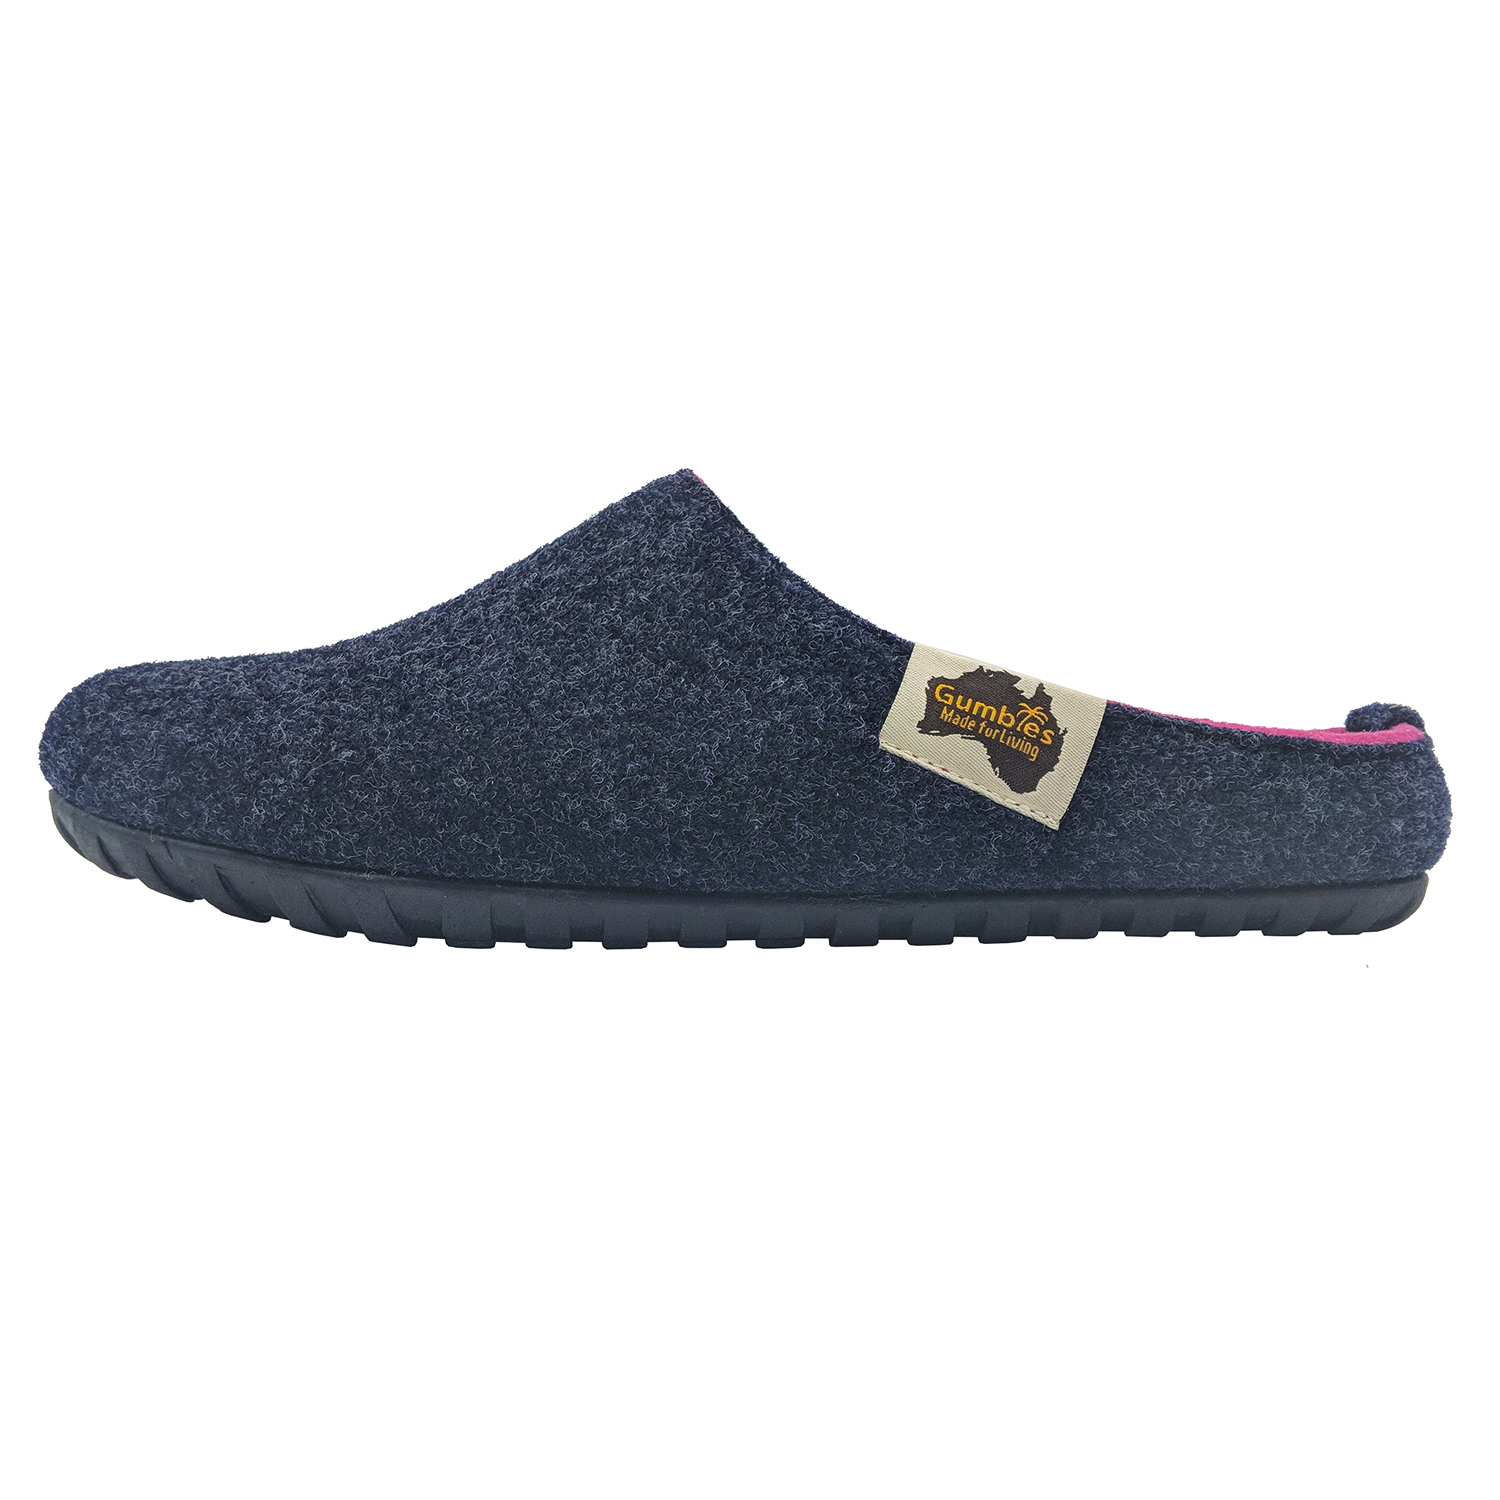 Gumbies Outback Slipper, navy/pink